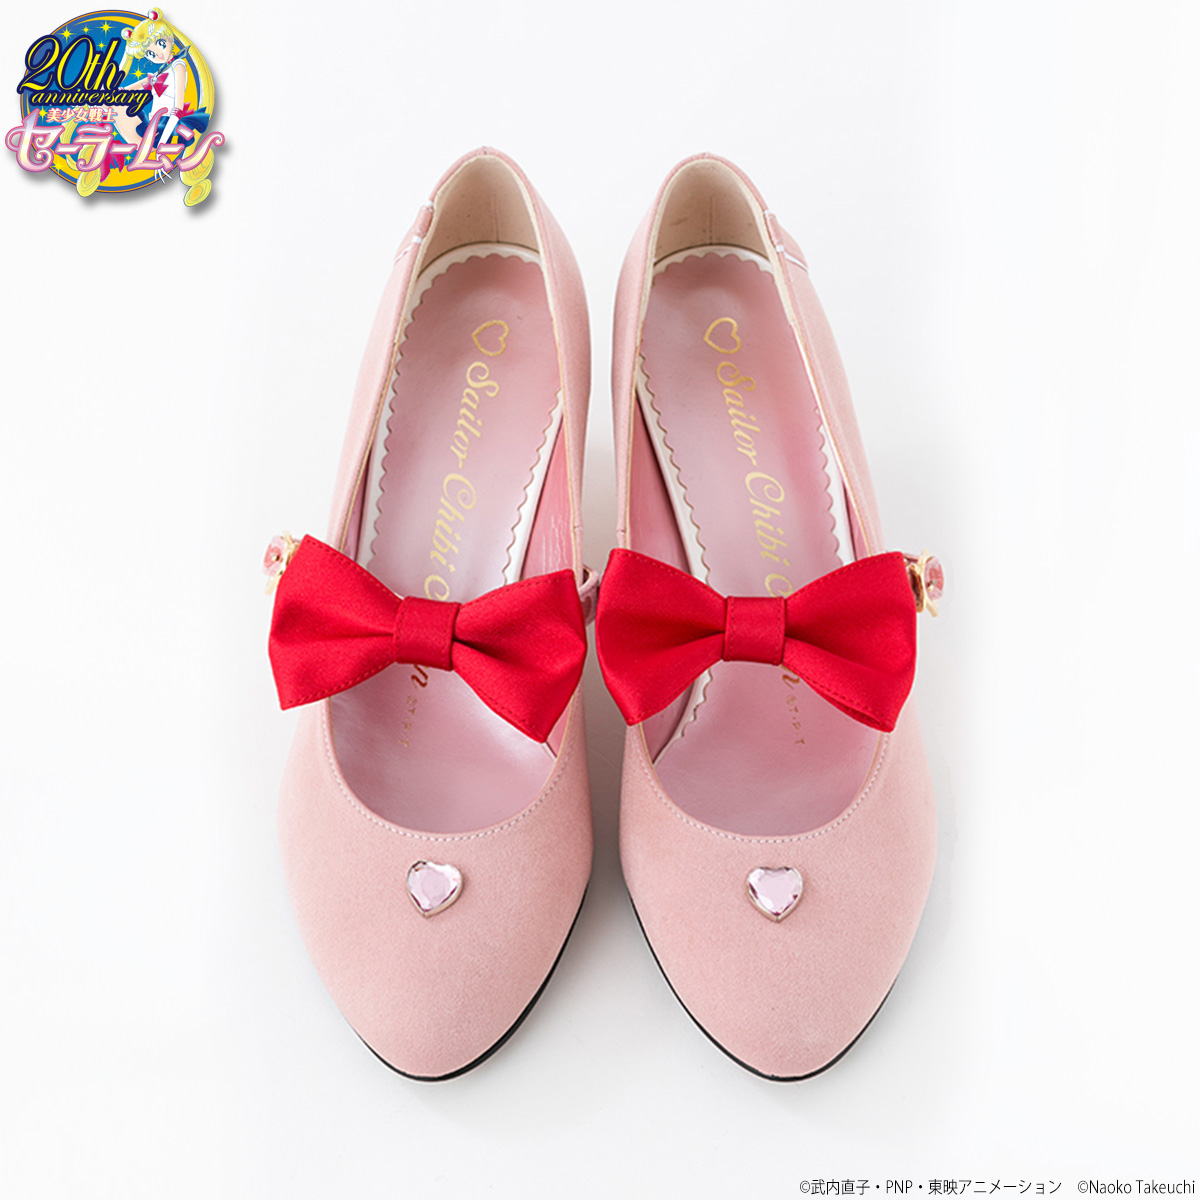 Sailor Moon x Tyake Tyoke Shoes 2nd Collaboration